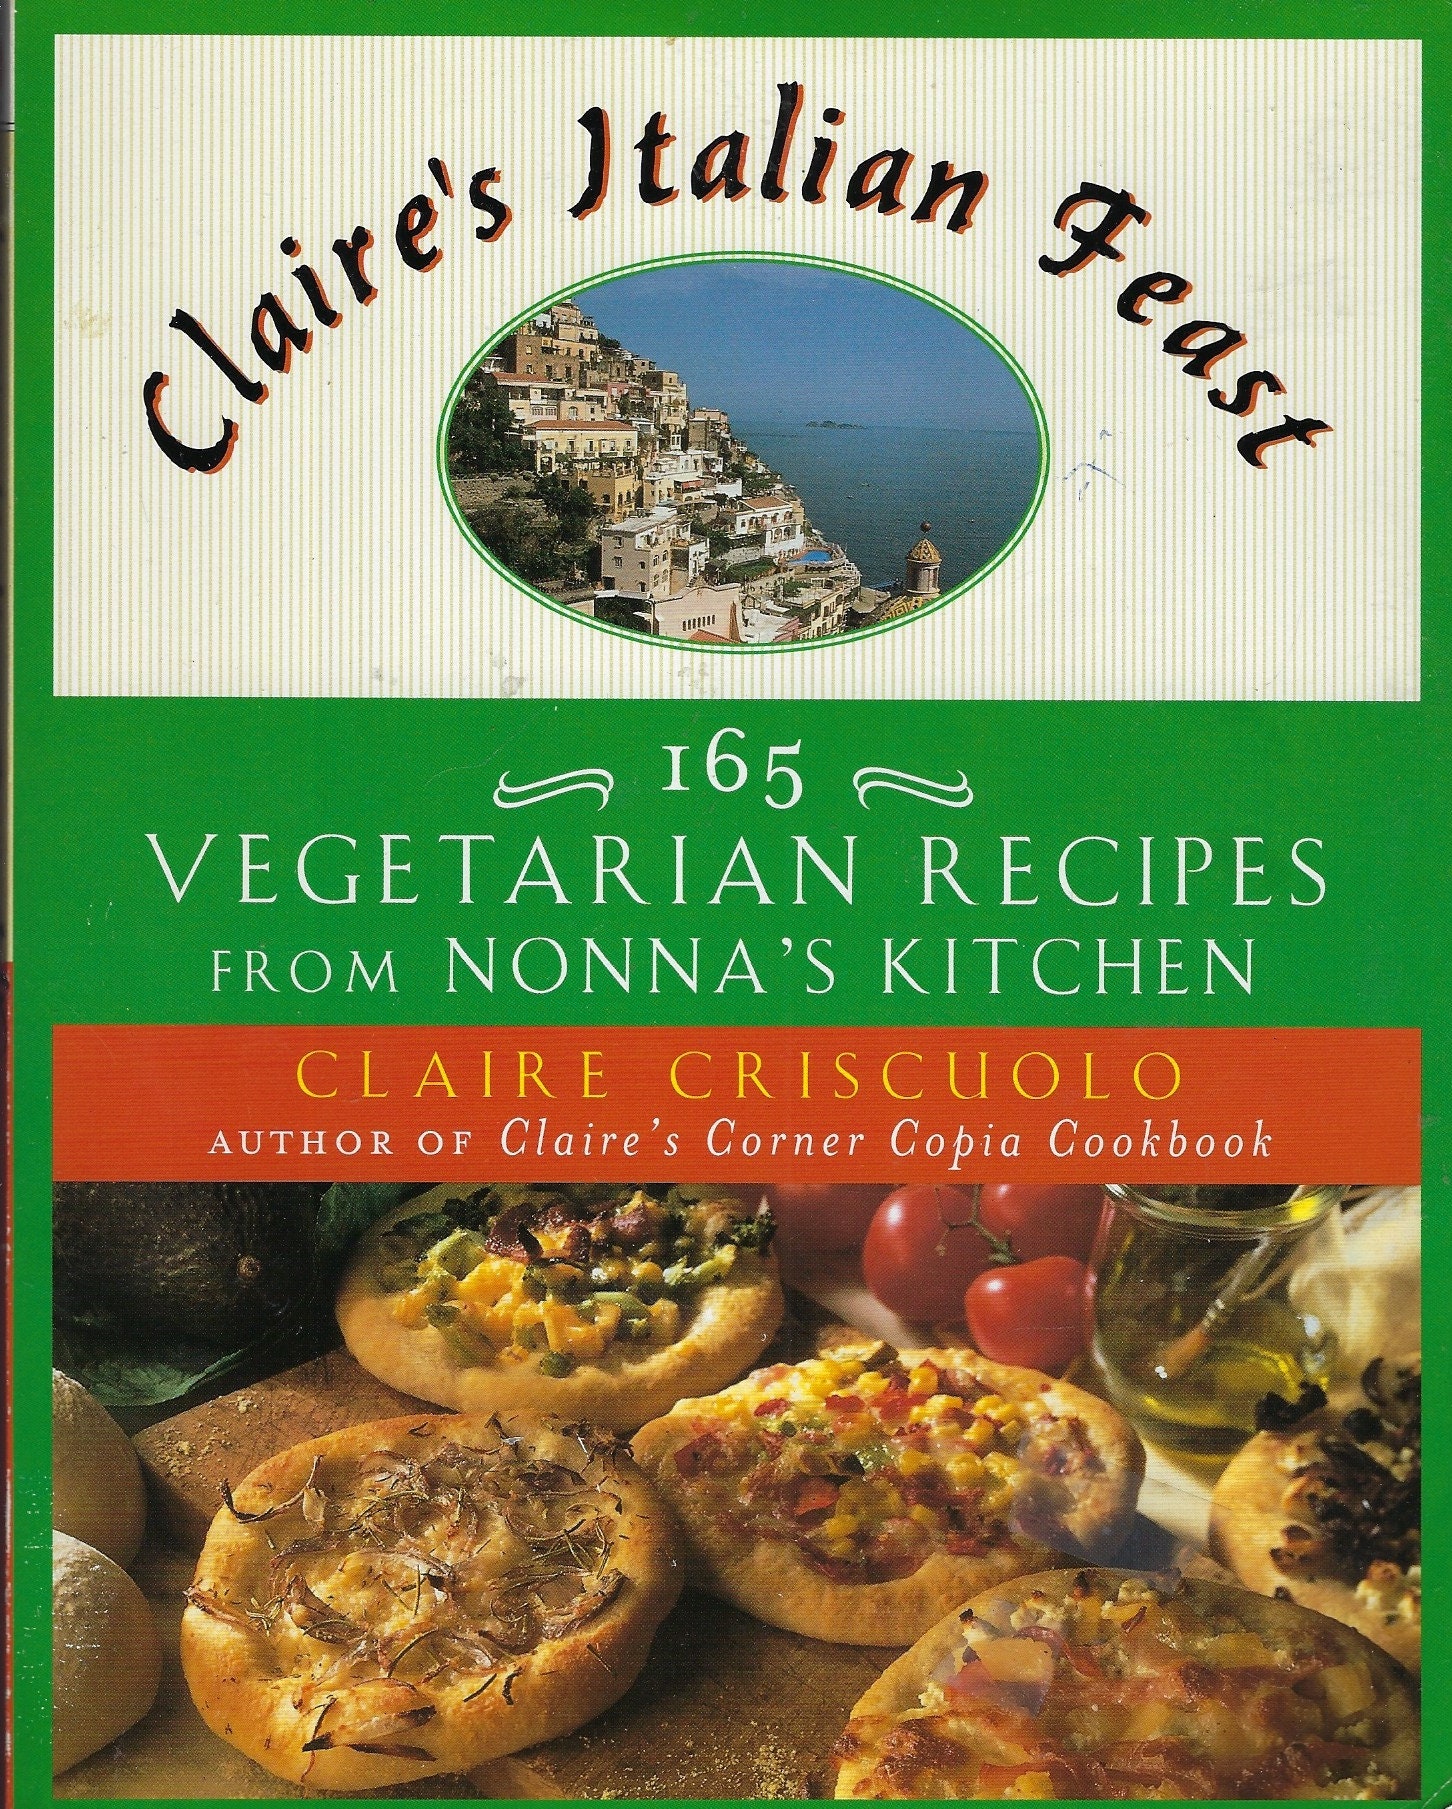 Claire's Italian Feast Vegetarian Recipes From Nonna's Kitchen Cookbook By Claire Criscuolo Signed Author Collecitble Rare Cook Book